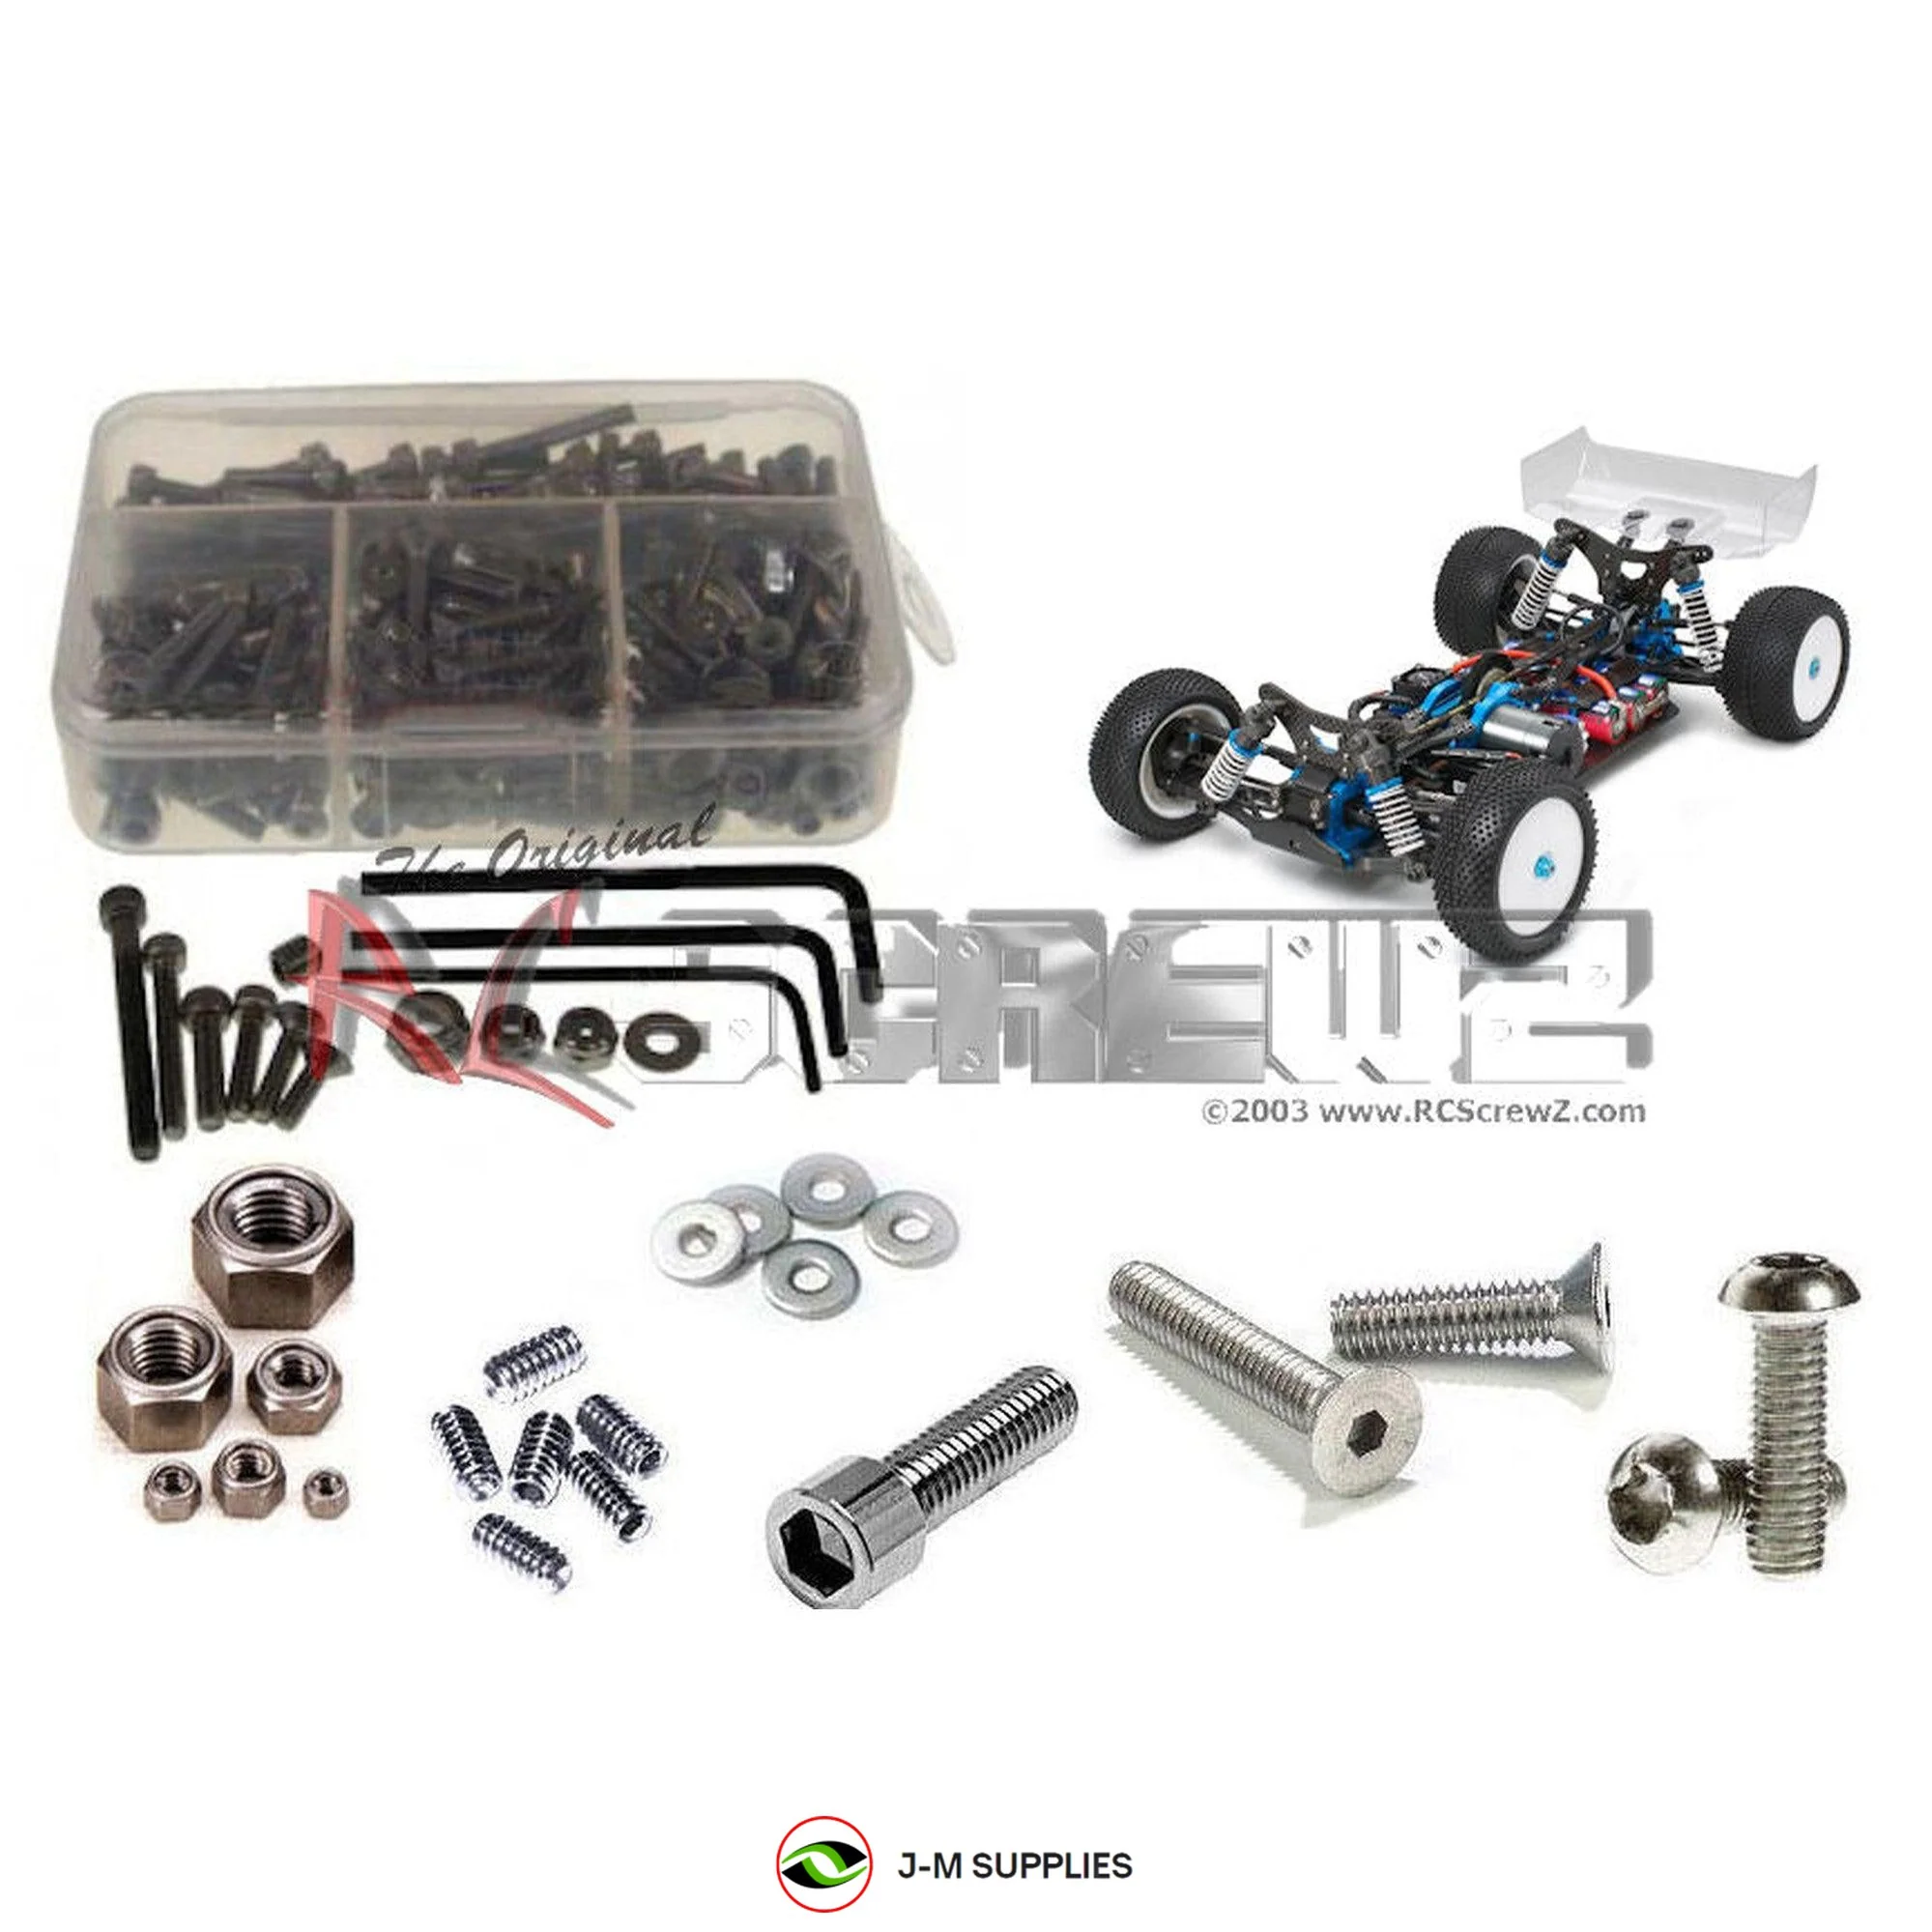 RCScrewZ Stainless Screw Kit tam143 for Tamiya TRF 511 1/10th Buggy #42139 - Picture 1 of 12